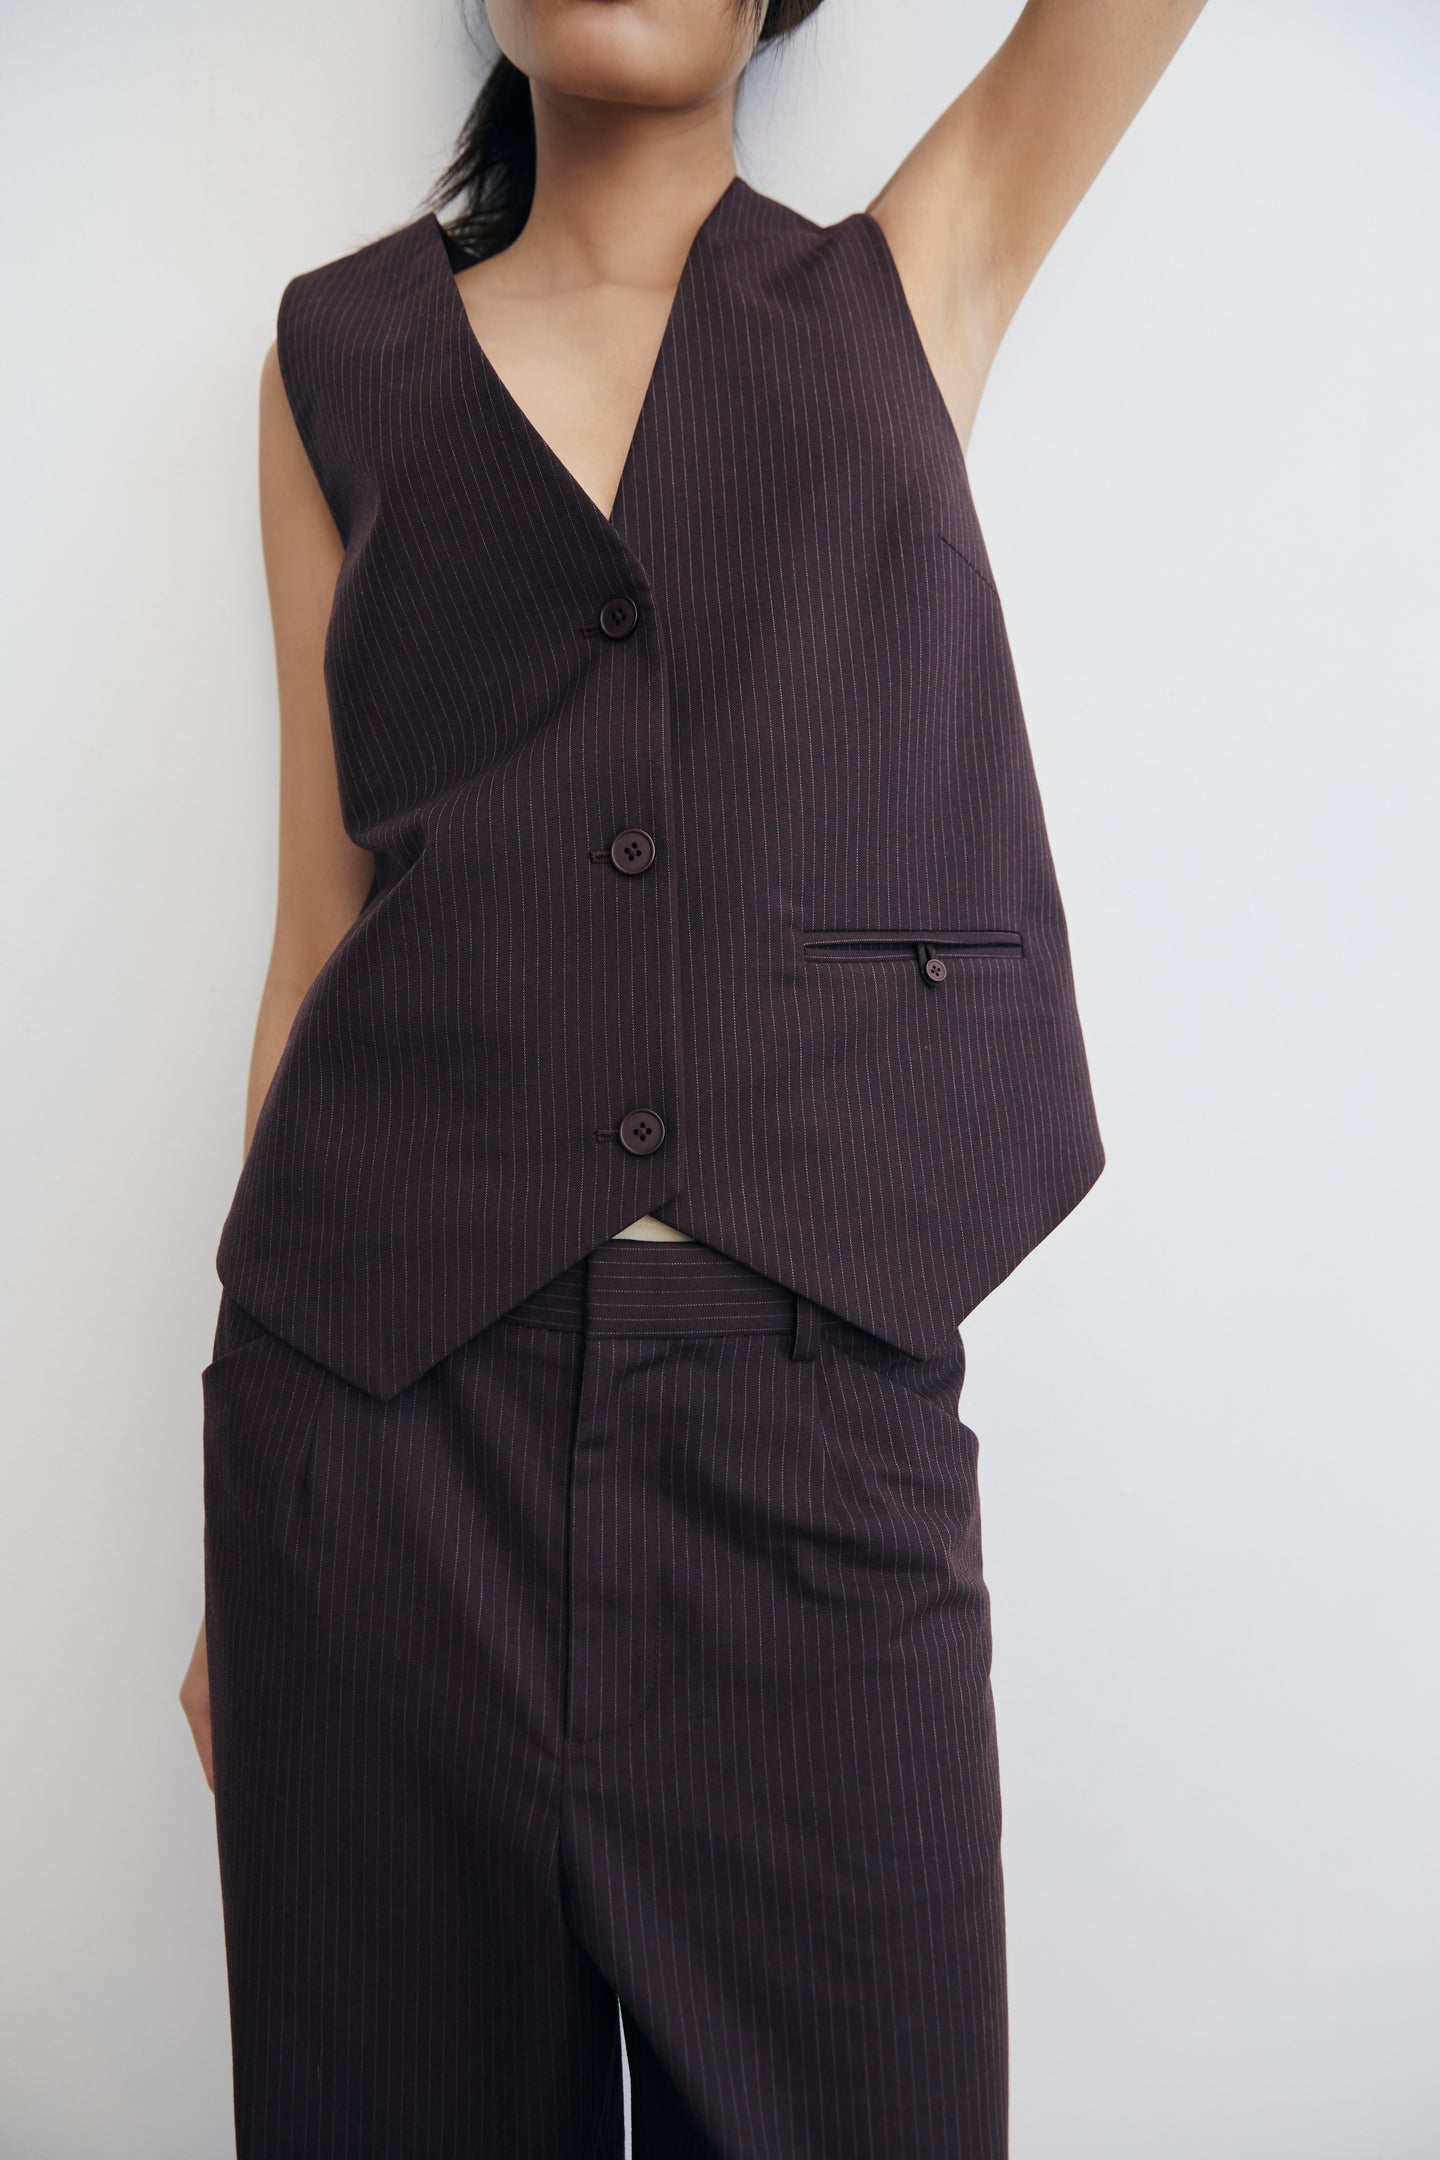 SIR the label Guillaume Vest Plum Pinstripe